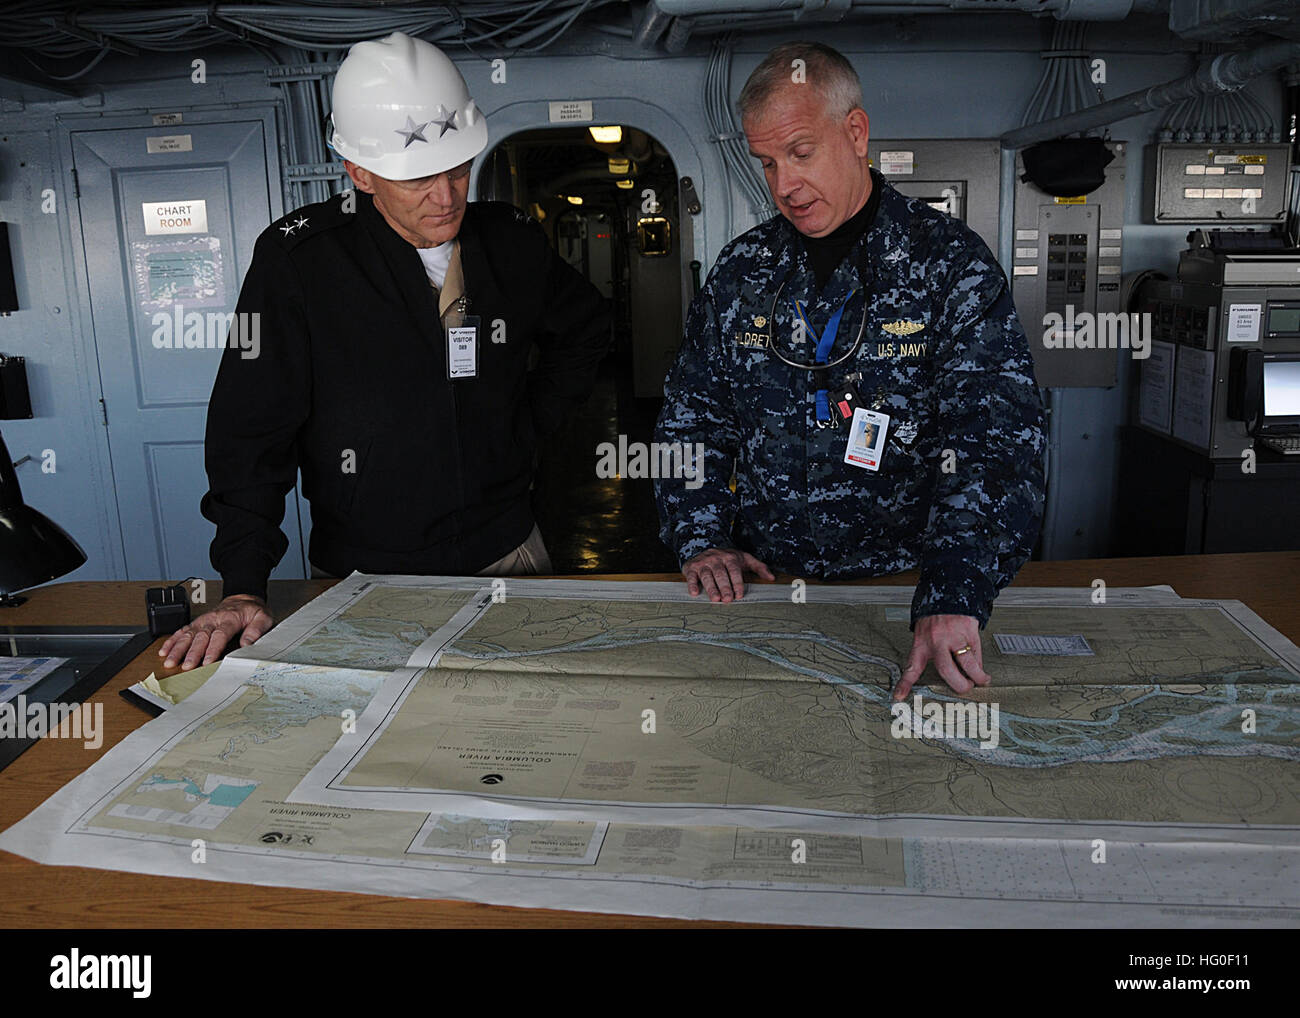 Capt. Pete Hildreth, commanding officer of the submarine tender USS Frank Cable (AS 40), shows Rear Adm. James Caldwell Jr., Commander, Submarine Force, U.S. Pacific Fleet, the navigation charts used to travel down the Columbia River. Frank Cable is temporarily relieved from conducting maintenance of submarines and service vessels deployed in the U.S. 7th Fleet area of responsibility by the submarine tender USS Emory S. Land (AS 39) and is currently in Portland for a regular overhaul and dry-docking. USS Frank Cable 120309-N-CO162-021 Stock Photo